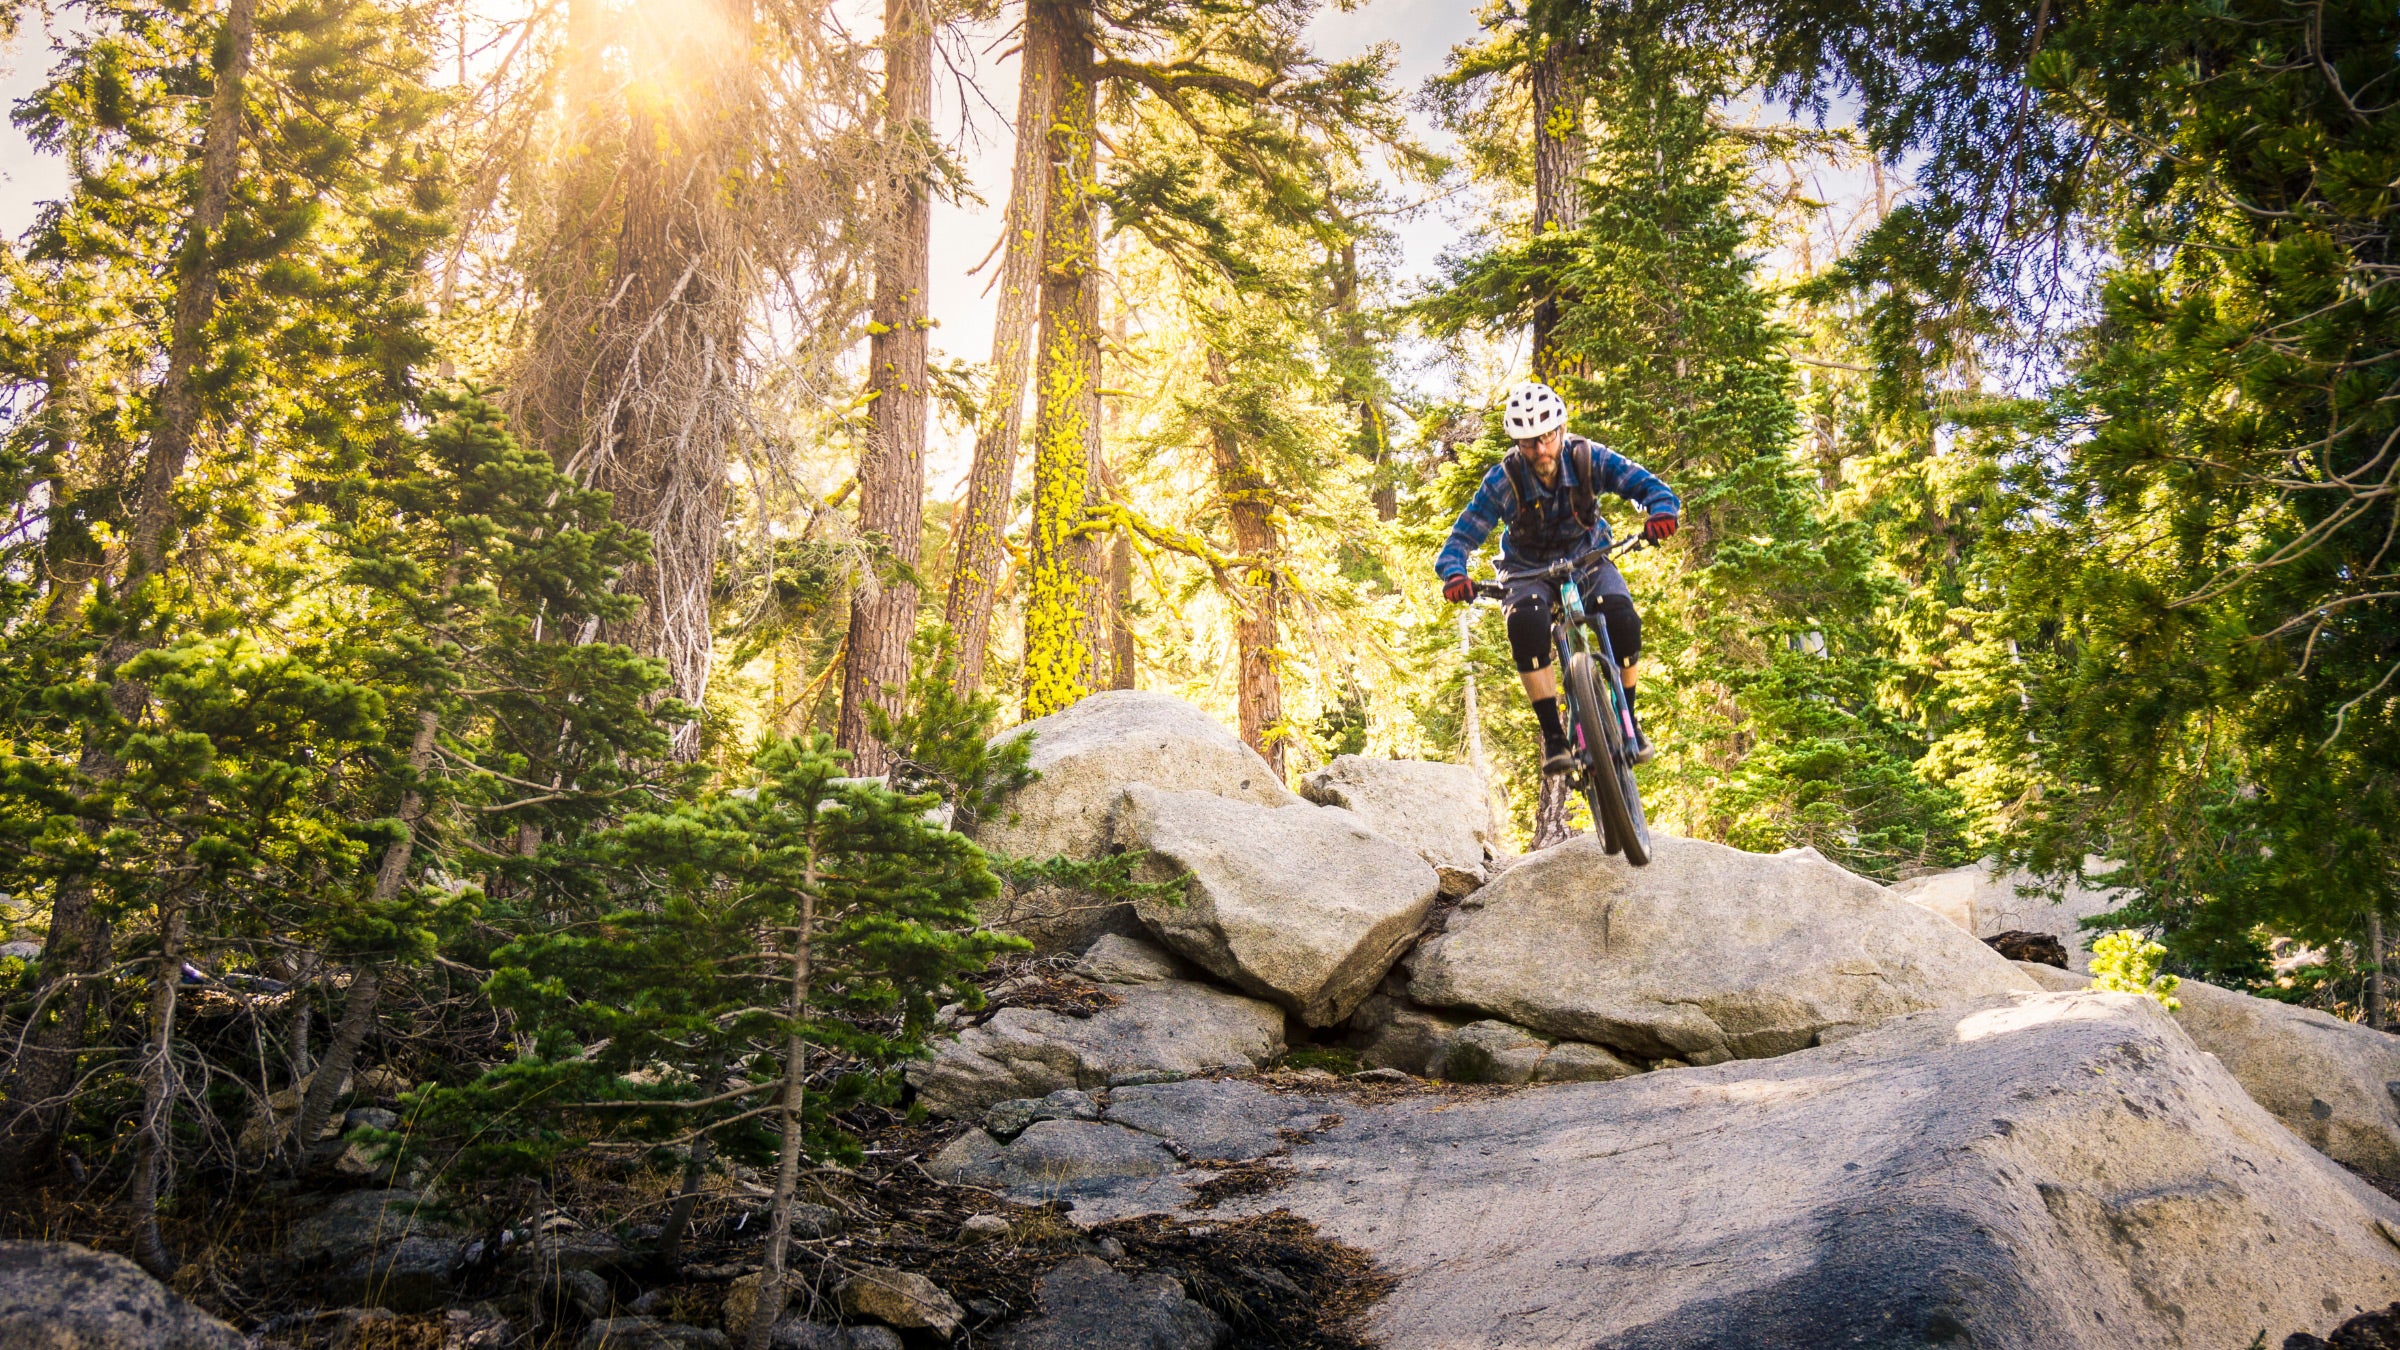 Why Did a Hunting Nonprofit Put a Bounty on Mountain Bikers?